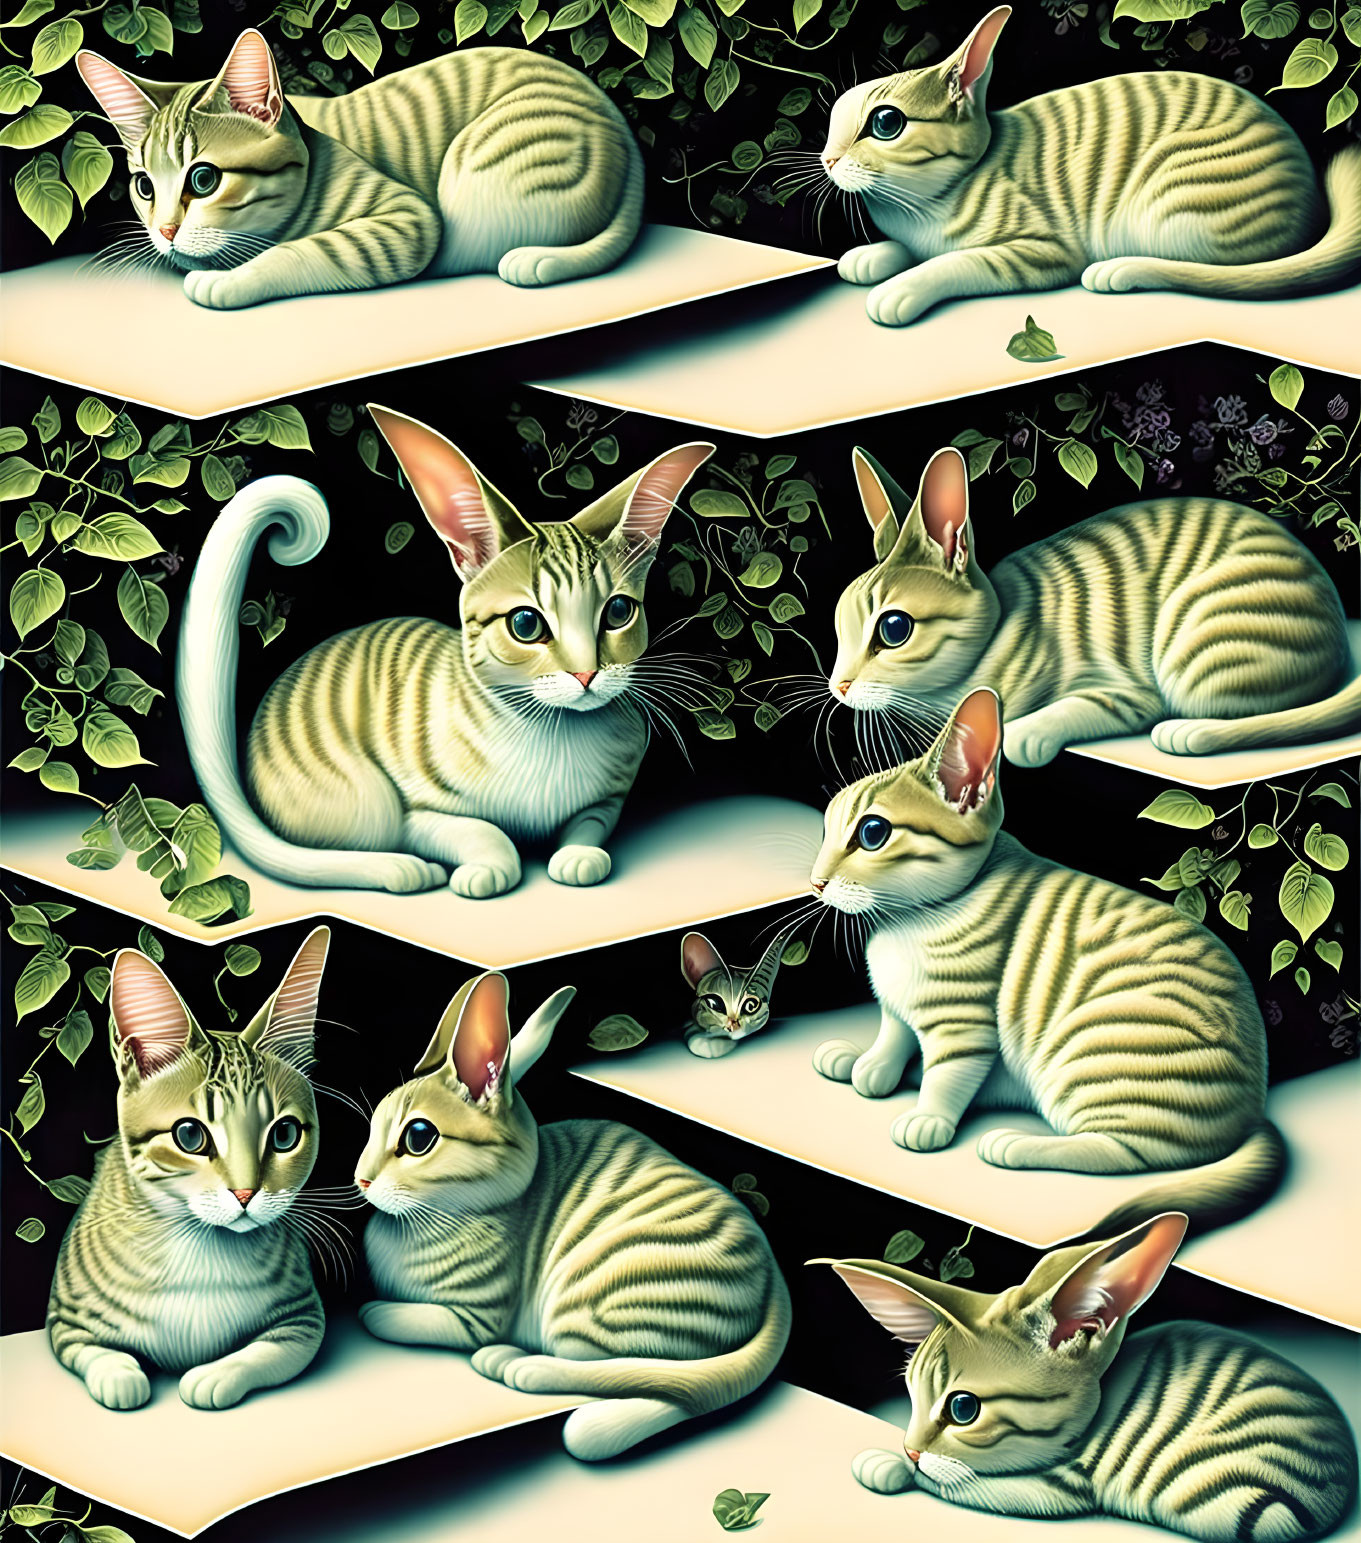 Multiple Striped Cats with Green Eyes in Ivy Setting on Dark Background